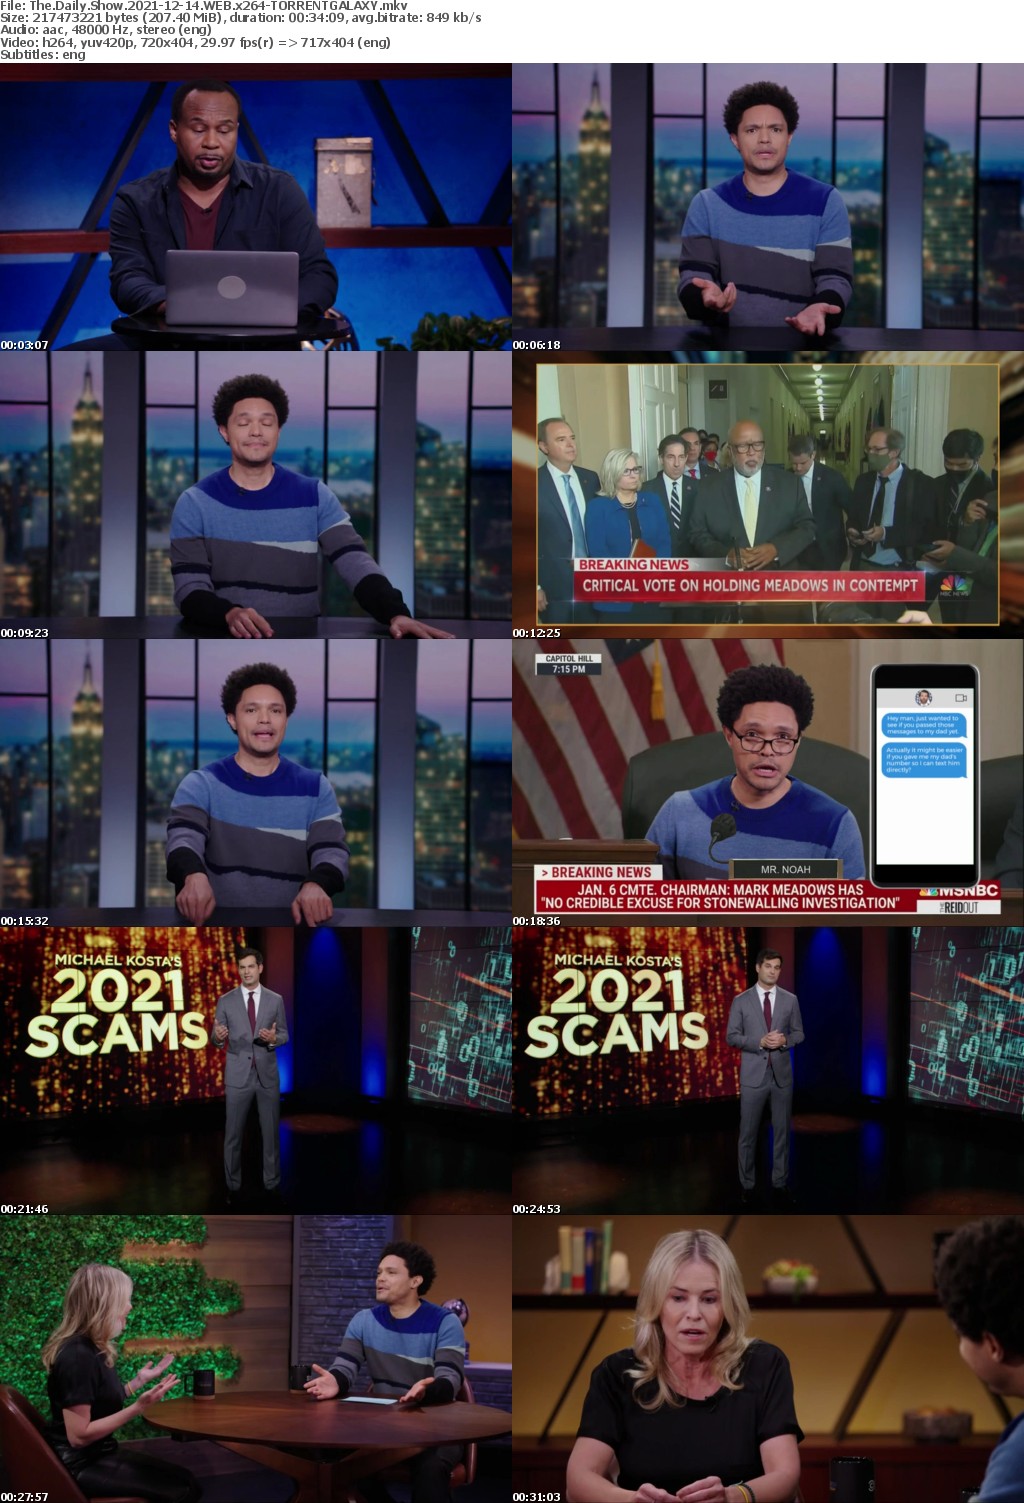 The Daily Show 2021-12-14 WEB x264-GALAXY